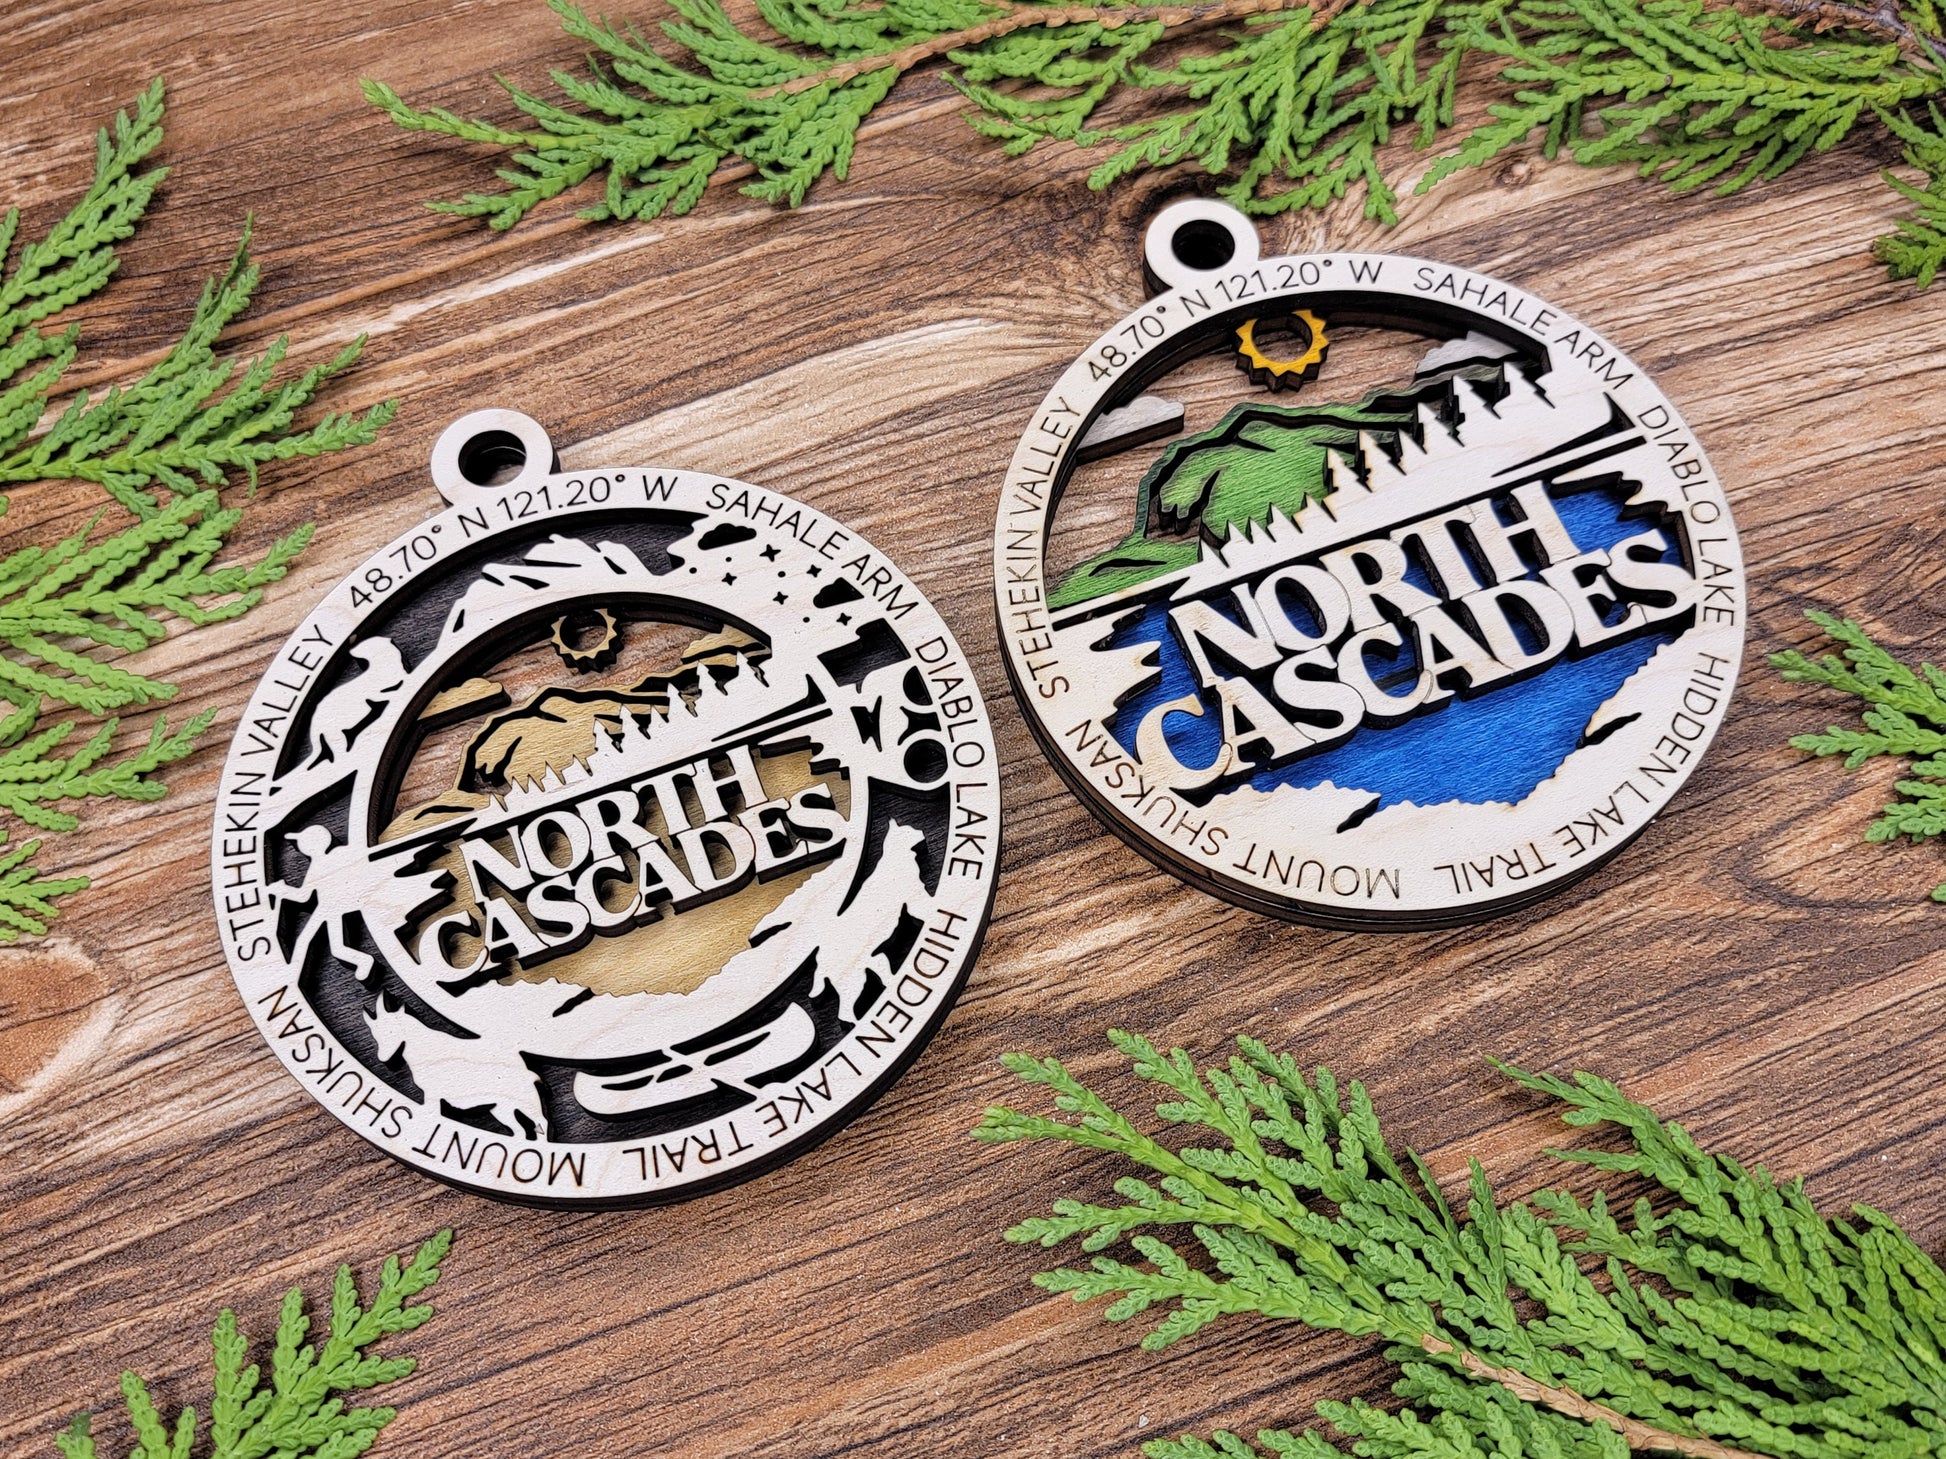 North Cascades Park Ornament - Includes 2 Ornaments - Laser Design SVG, PDF, AI File Download - Tested On Glowforge and LightBurn